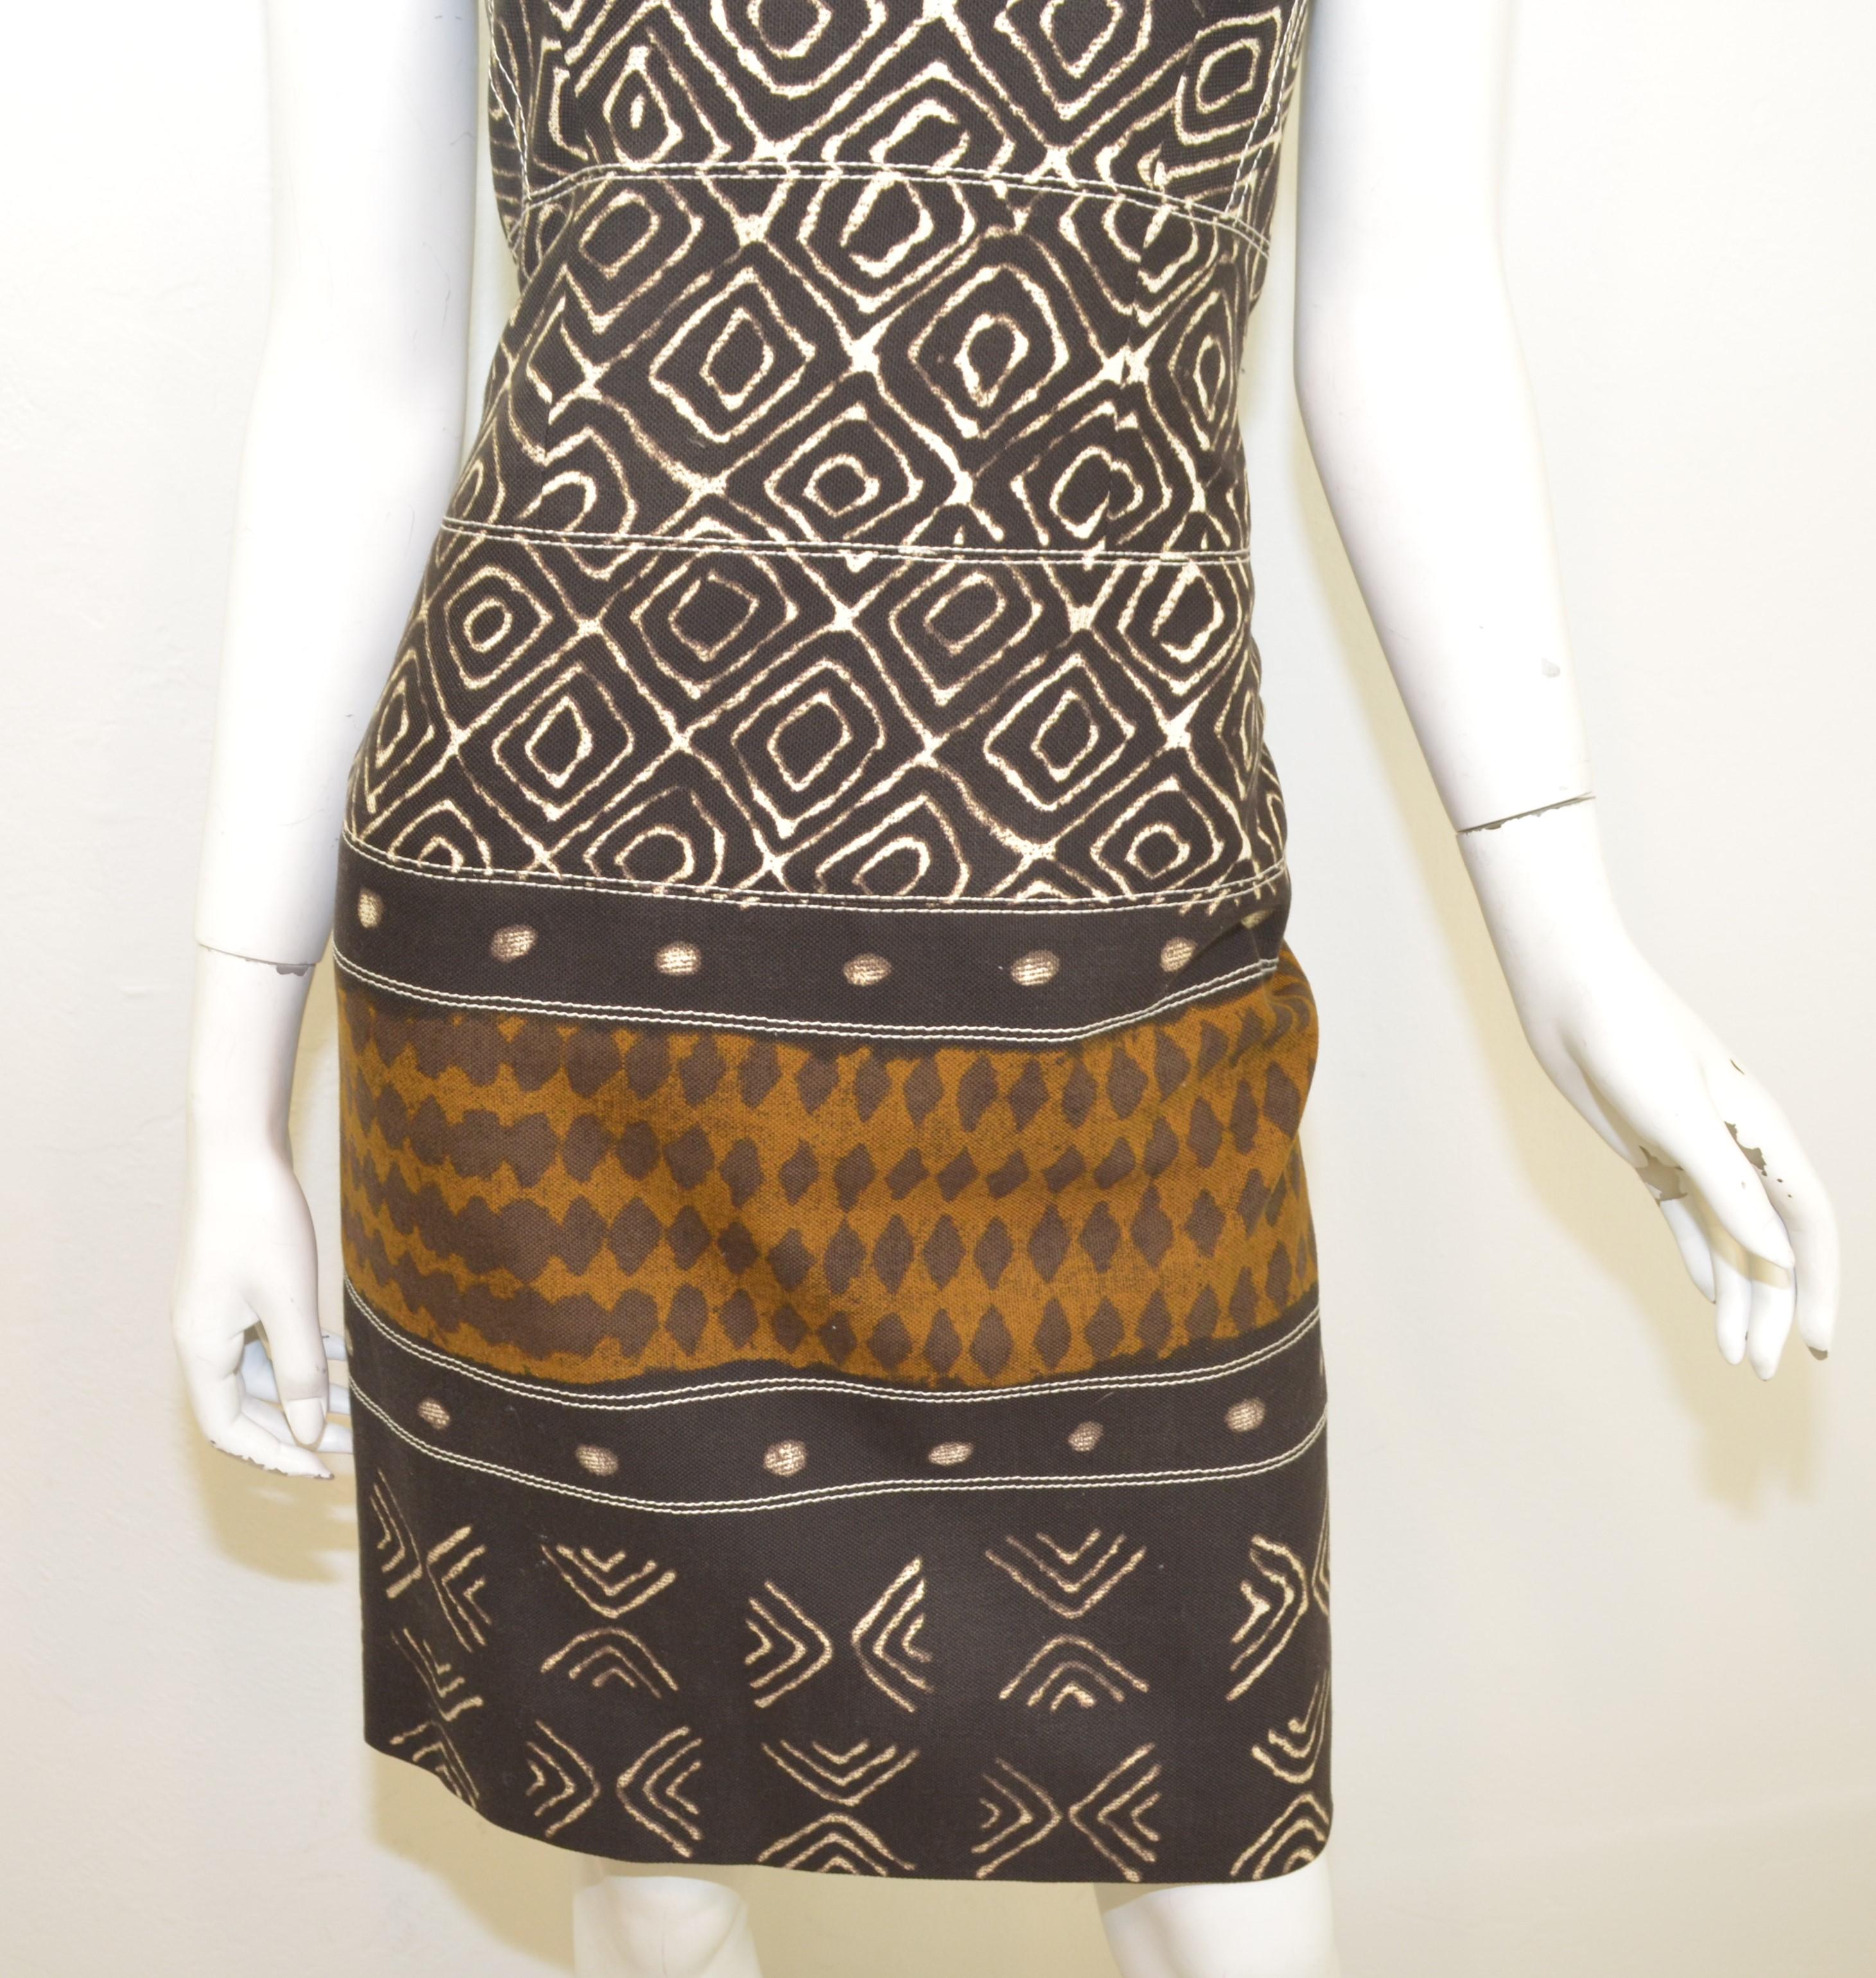 Oscar de la Renta dress from 2008 Summer collection. Dress is featured in a brown tribal print with a uniquely shaped halter neckline, boned bodice, and an open back with snap buttons and a zipper fastening. Dress is a size 6, made in Italy.

Bust